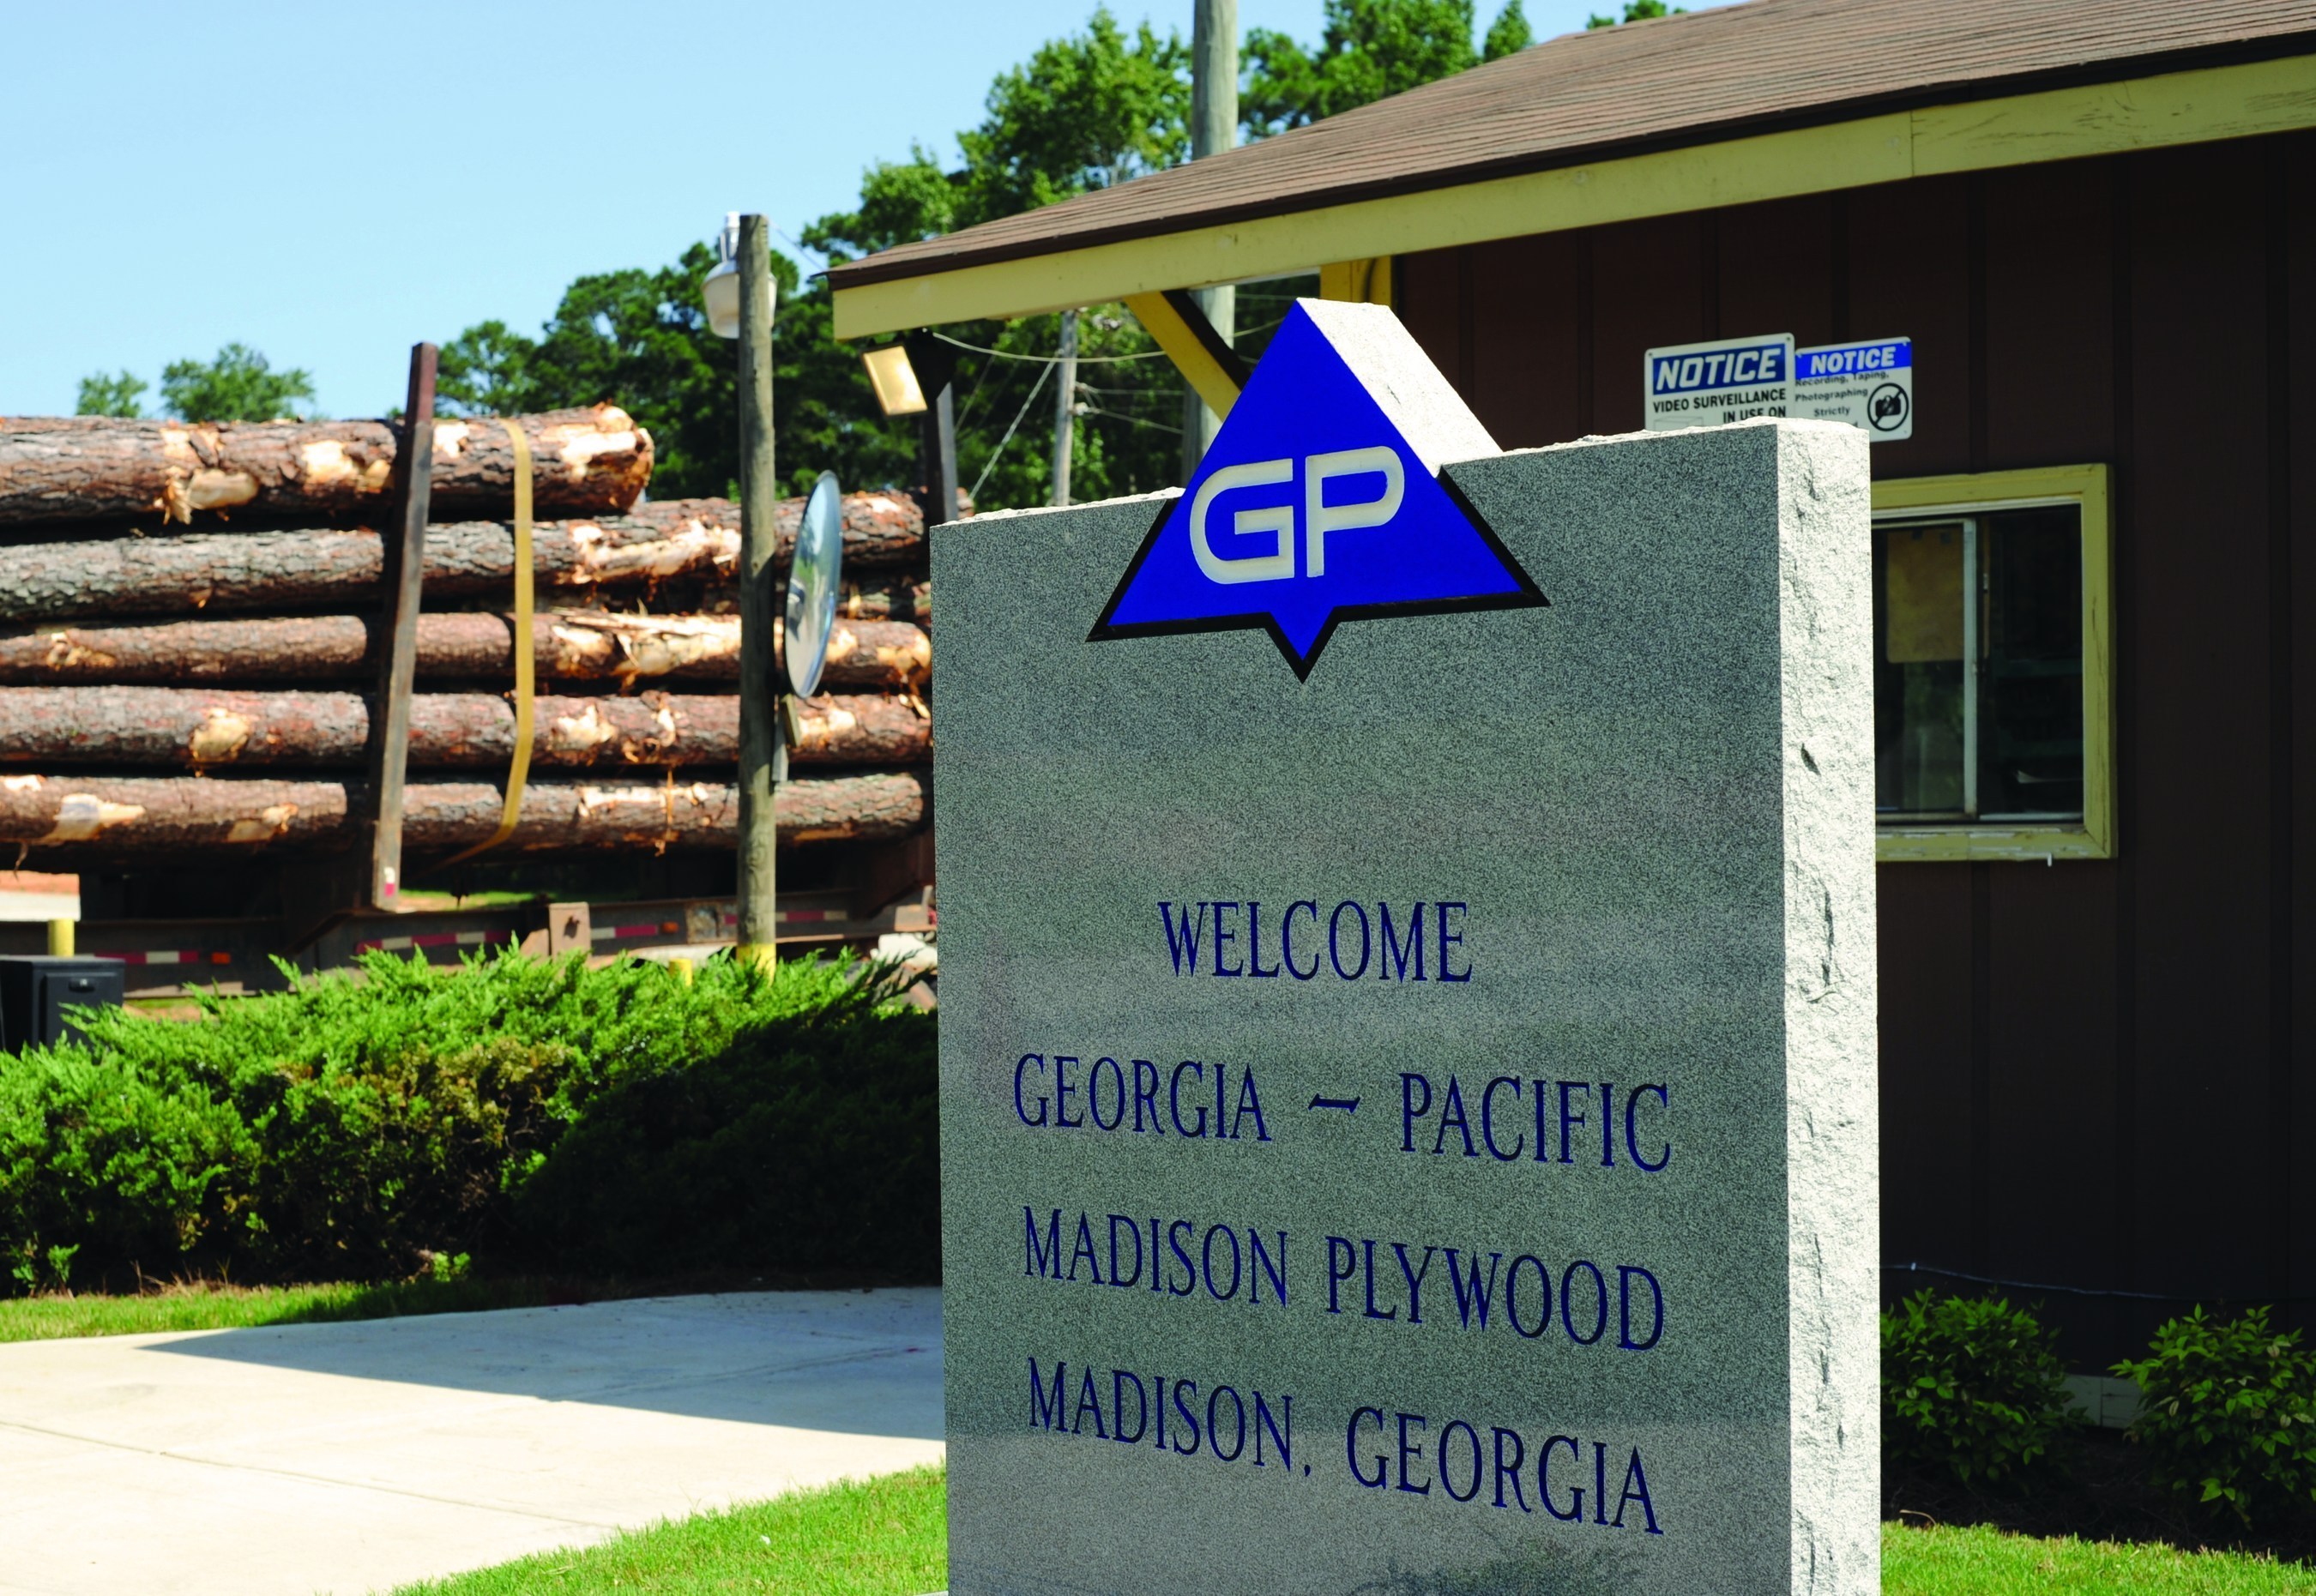 Georgia-Pacific is investing in its Madison, Georgia, plywood operations with recent and planned investments expected to total $65 million. (PRNewsFoto/Georgia-Pacific)